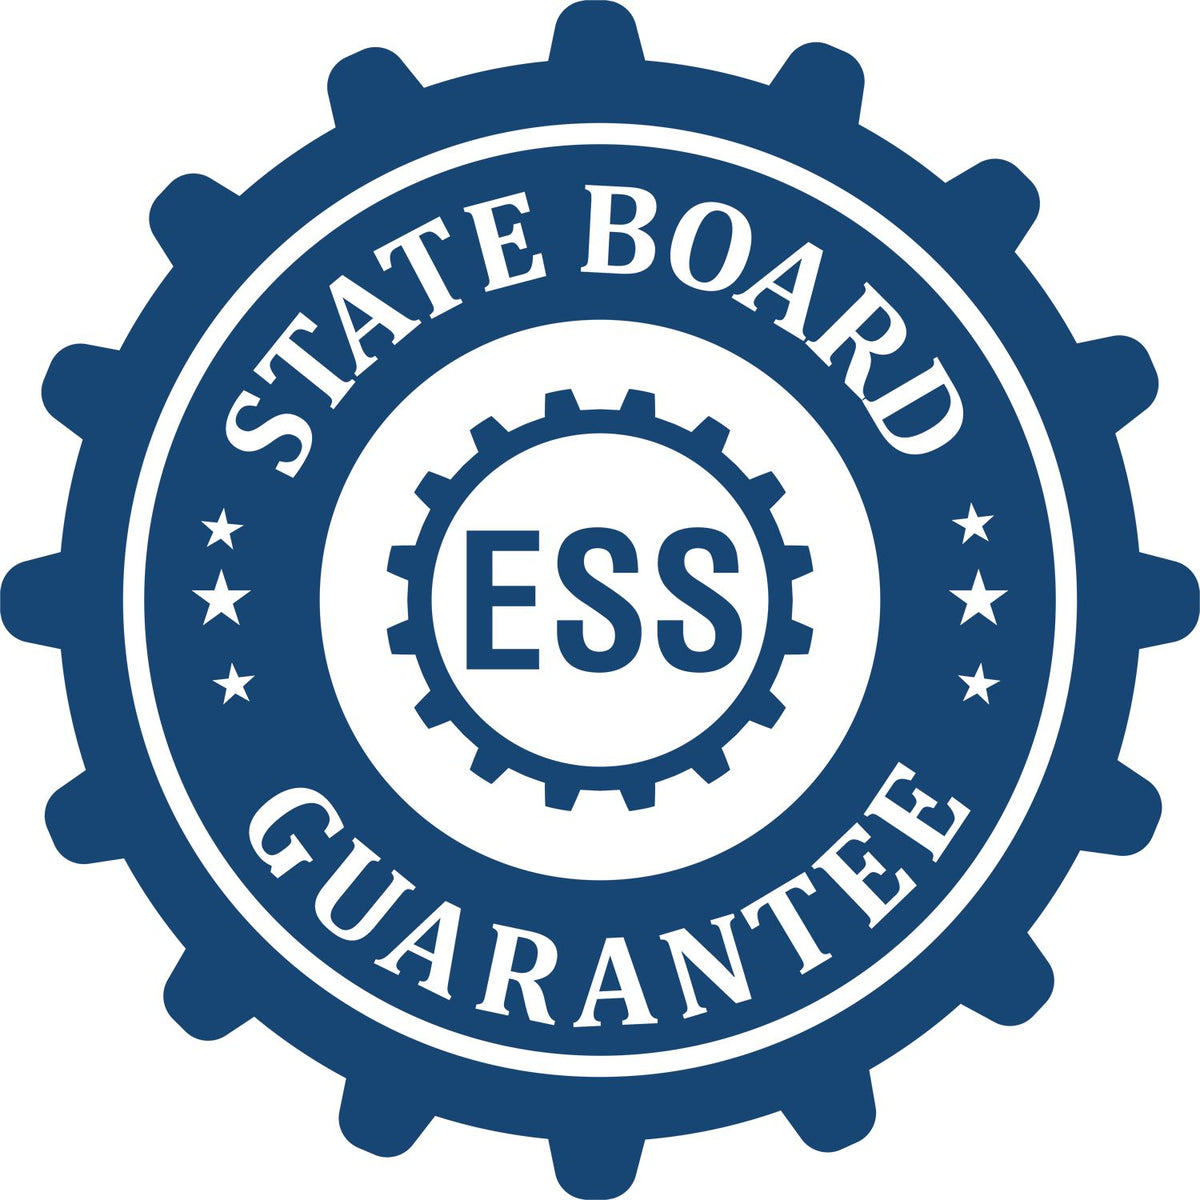 An emblem in a gear shape illustrating a state board guarantee for the Soft Georgia Professional Engineer Seal product.